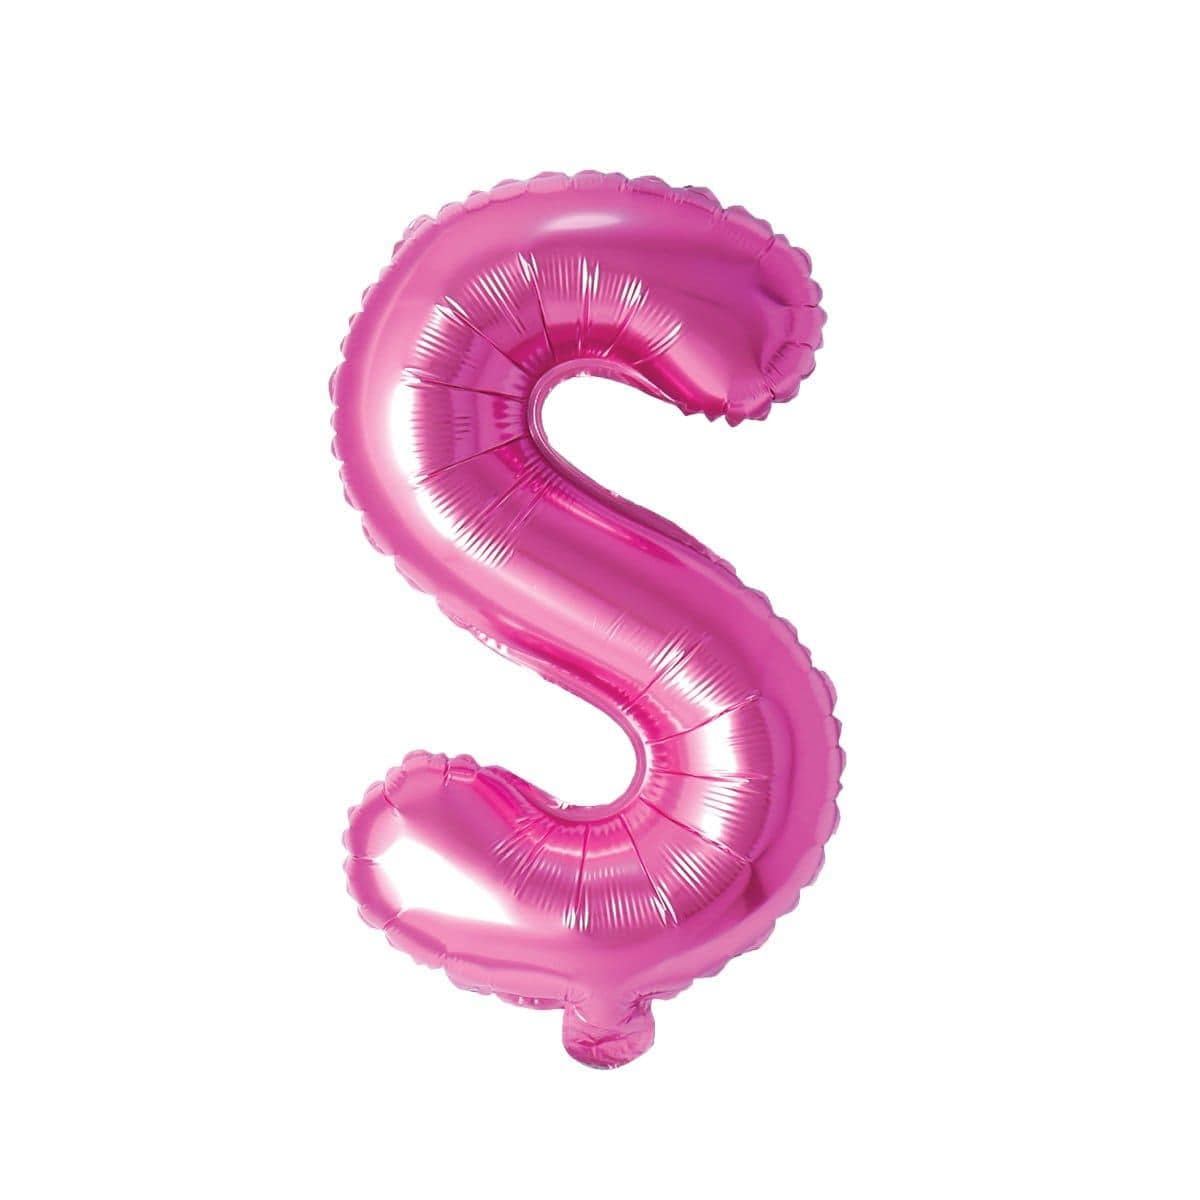 Buy Balloons Pink Letter S Foil Balloon, 16 Inches sold at Party Expert